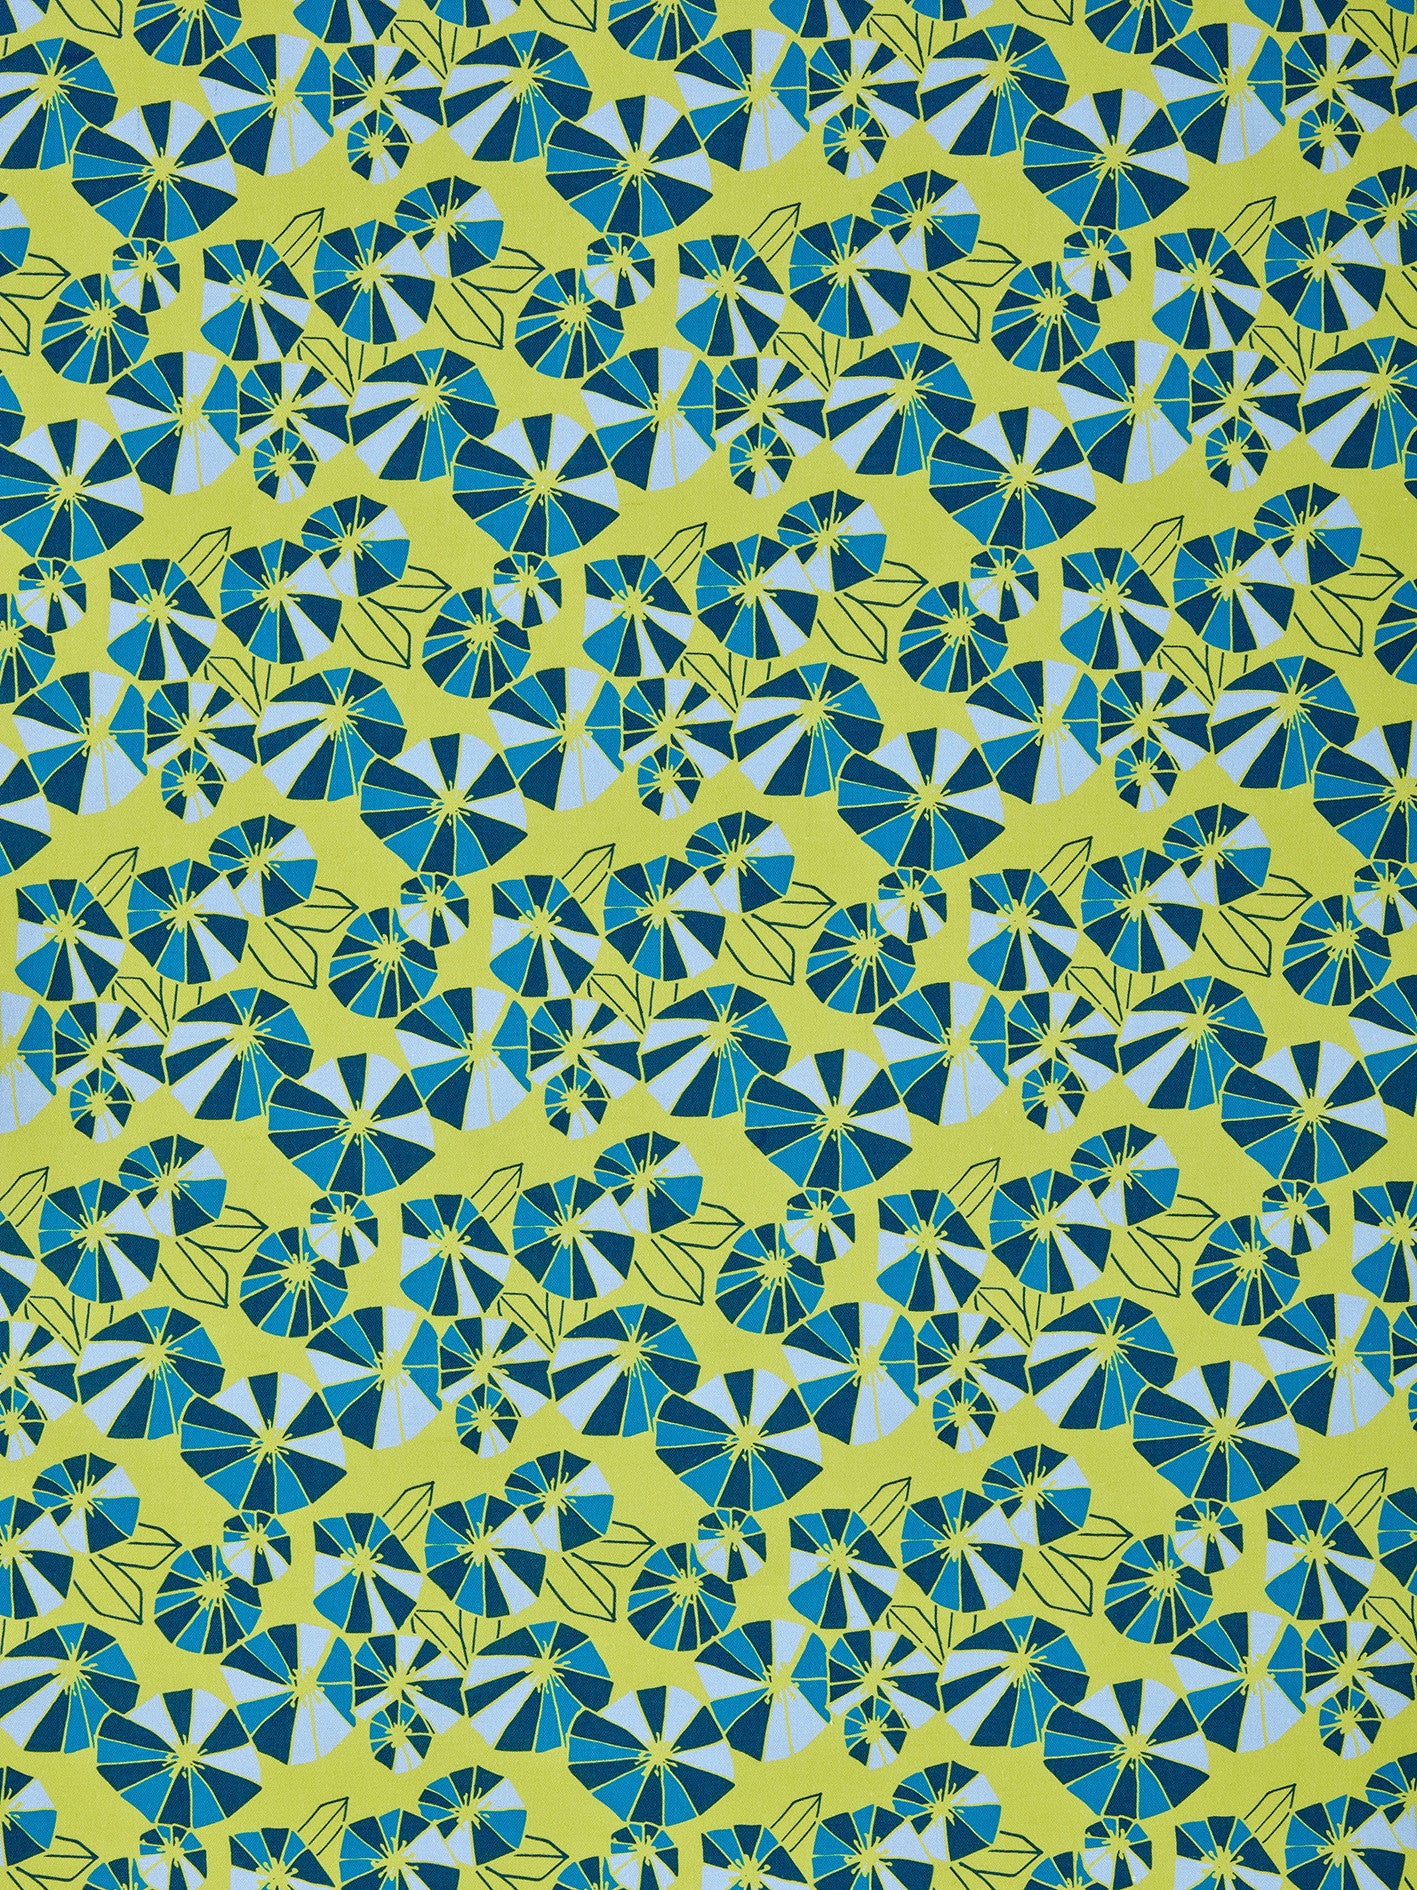 Graphic Eden Floral Pattern Printed Linen Cotton Canvas Fabric in Bright Chartreuse Yellow and pale winter,  dark petrol & turquoise blue  